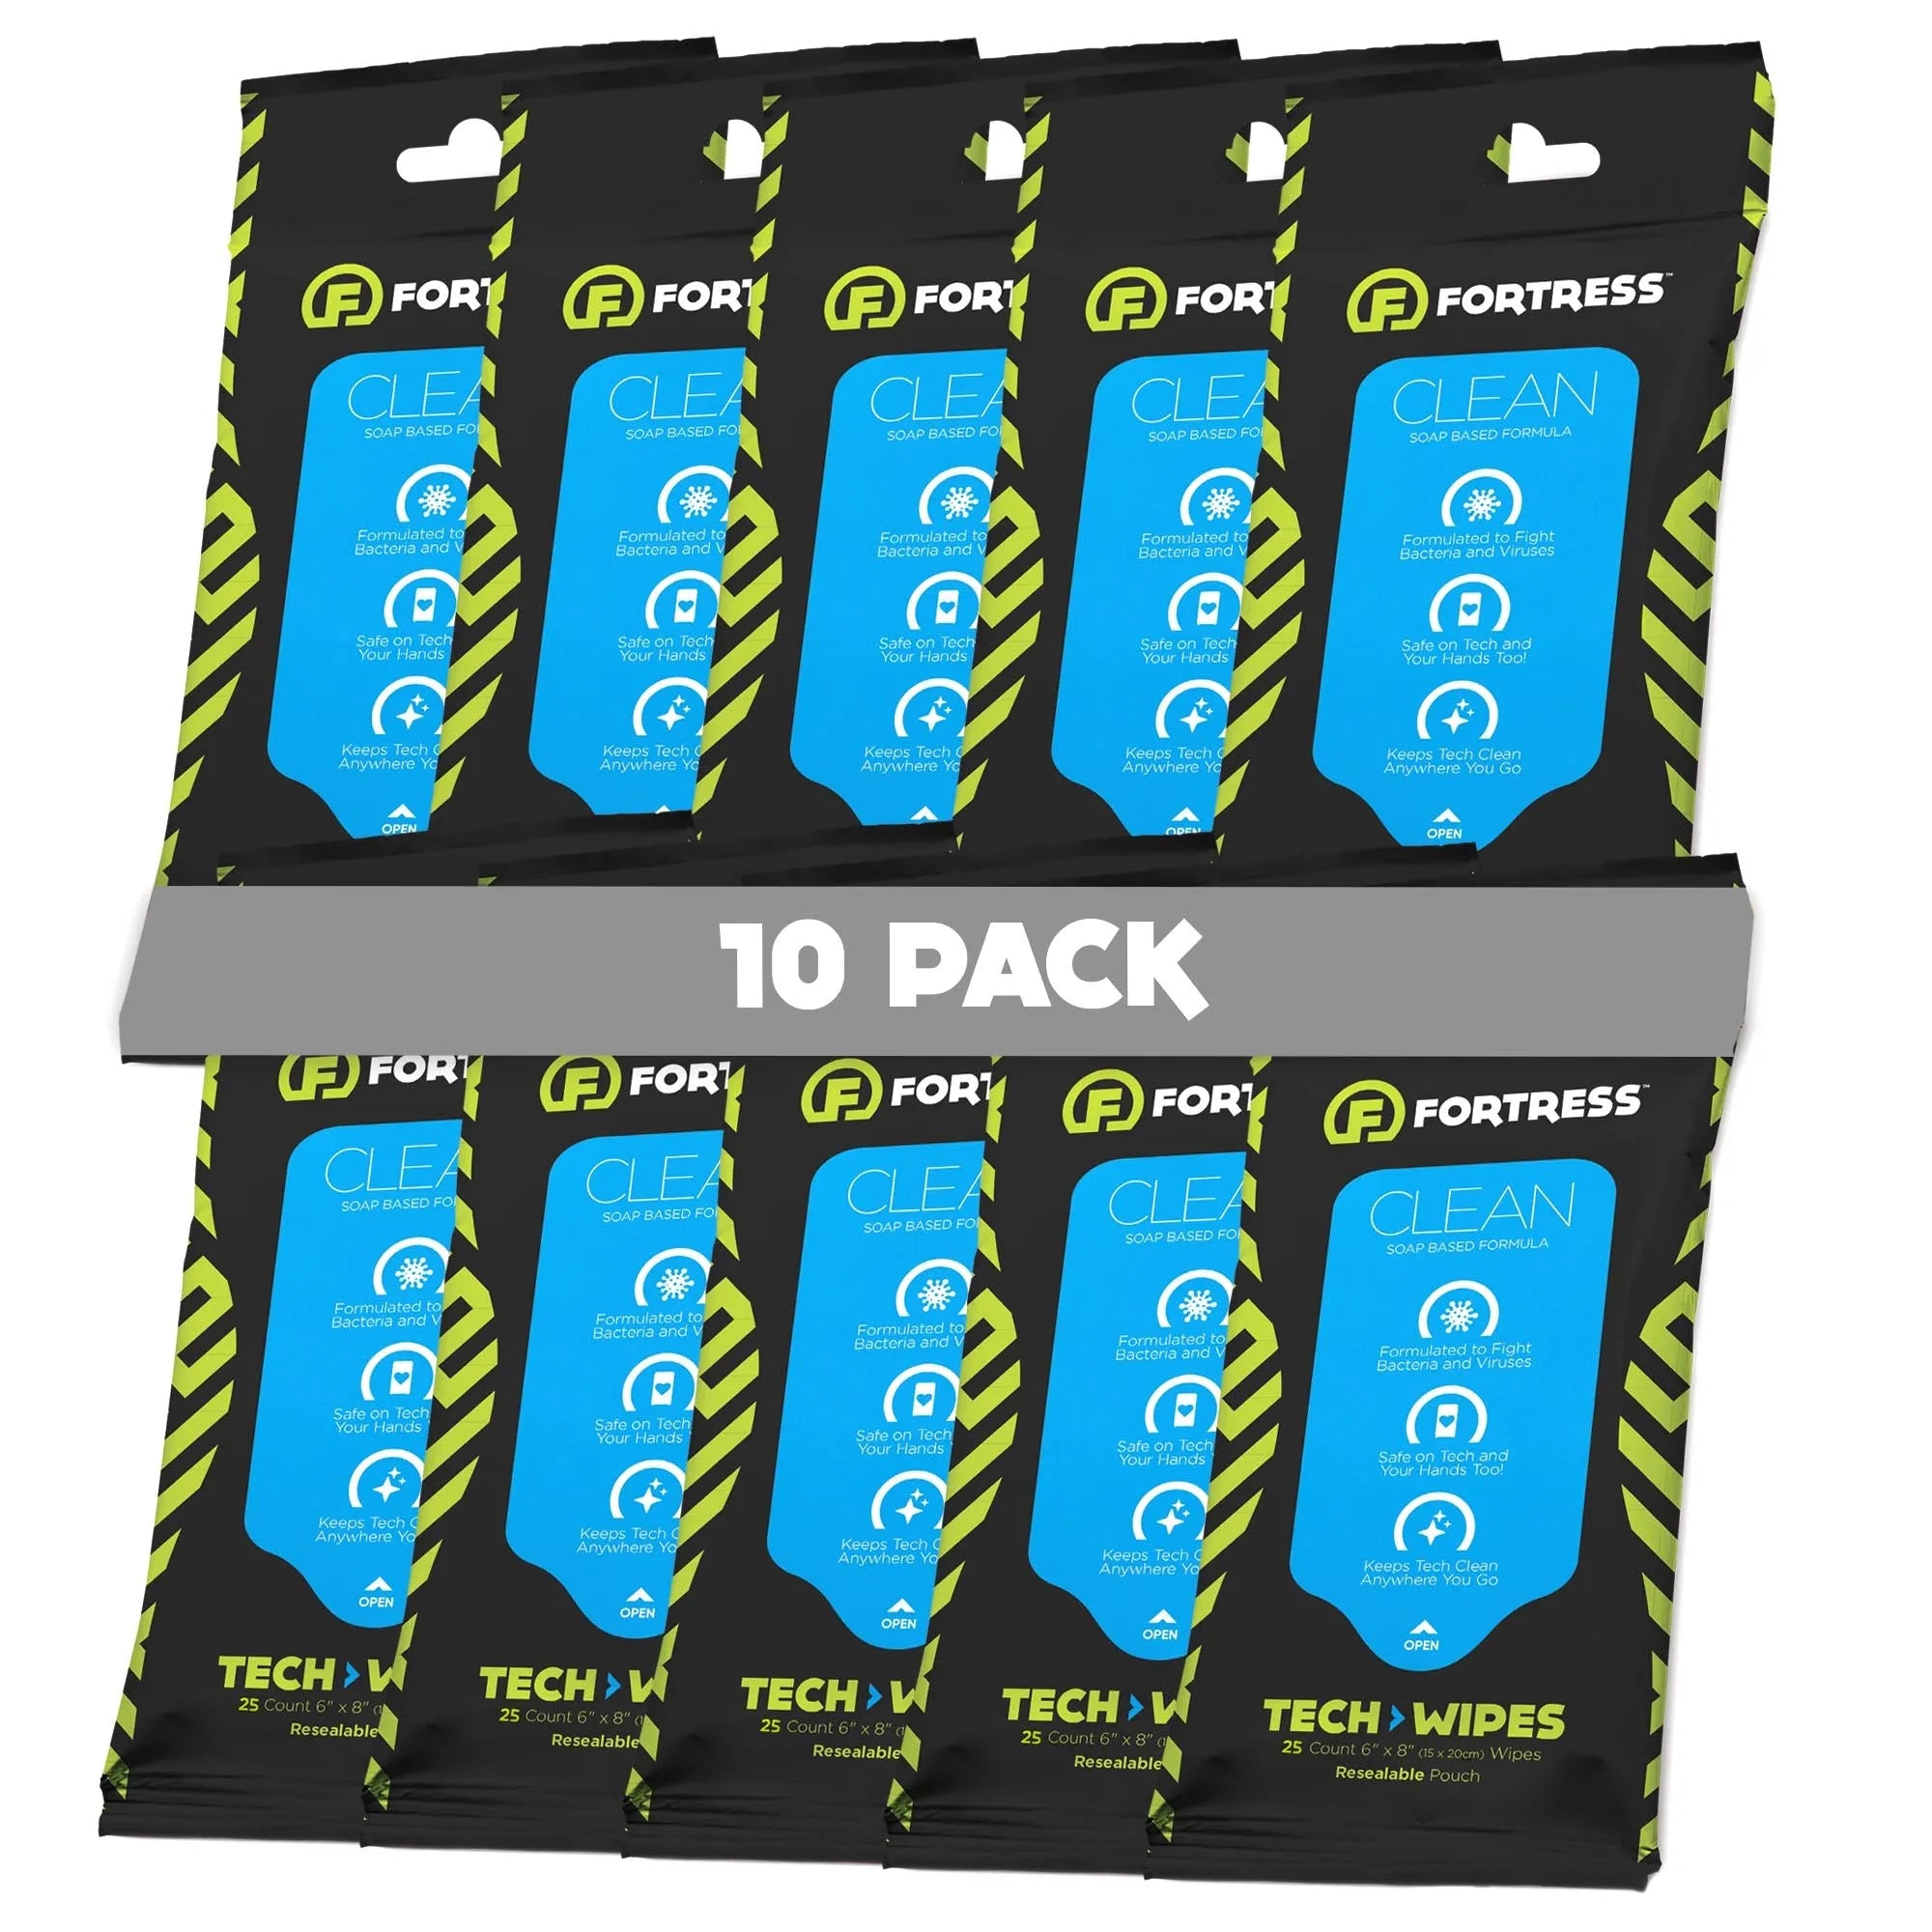 Fortress Tech Wipes (25 ct.) To-Go Disinfecting Wipes for Smartphones 10-PackYes Scooch Clean